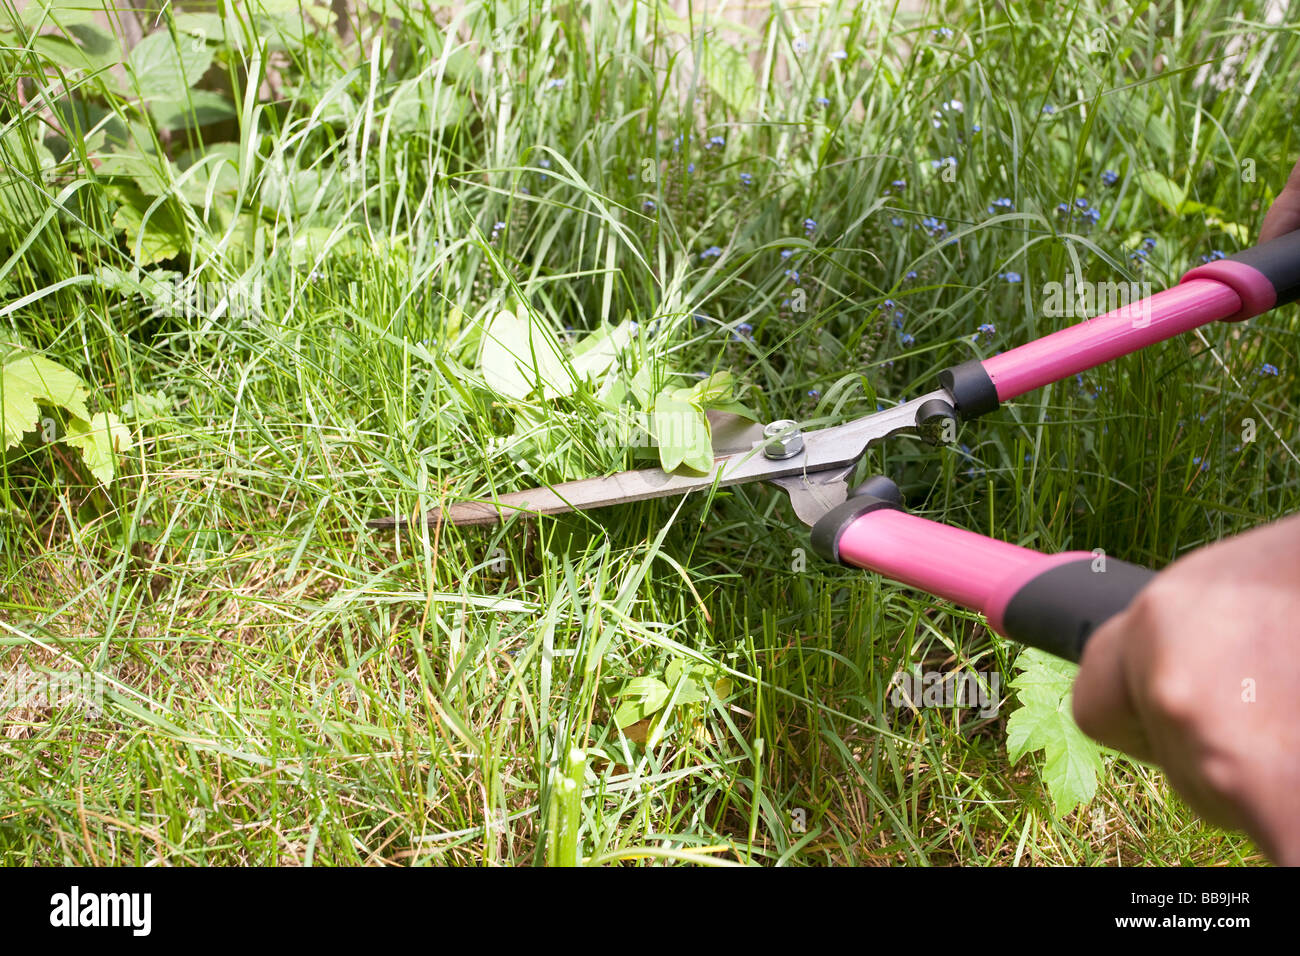 cutting long weeds in the garden with pink handled shears Stock Photo